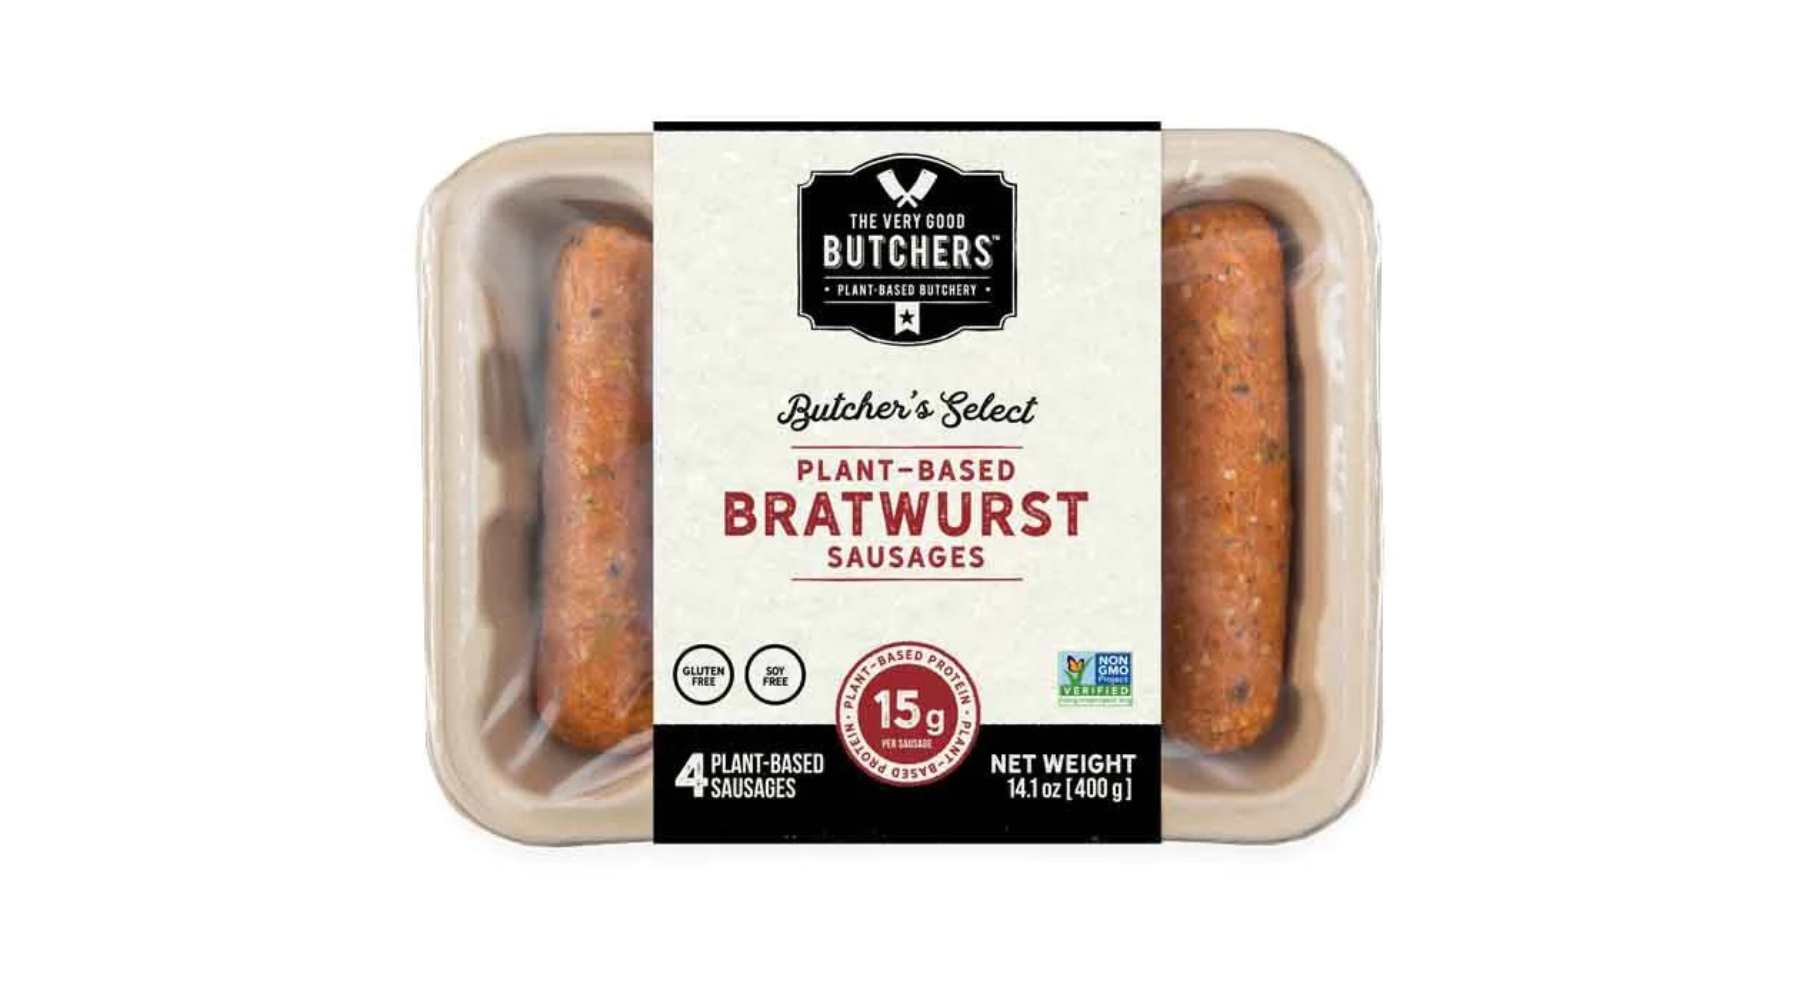 The Very Good Butchers - Bratwurst Sausages